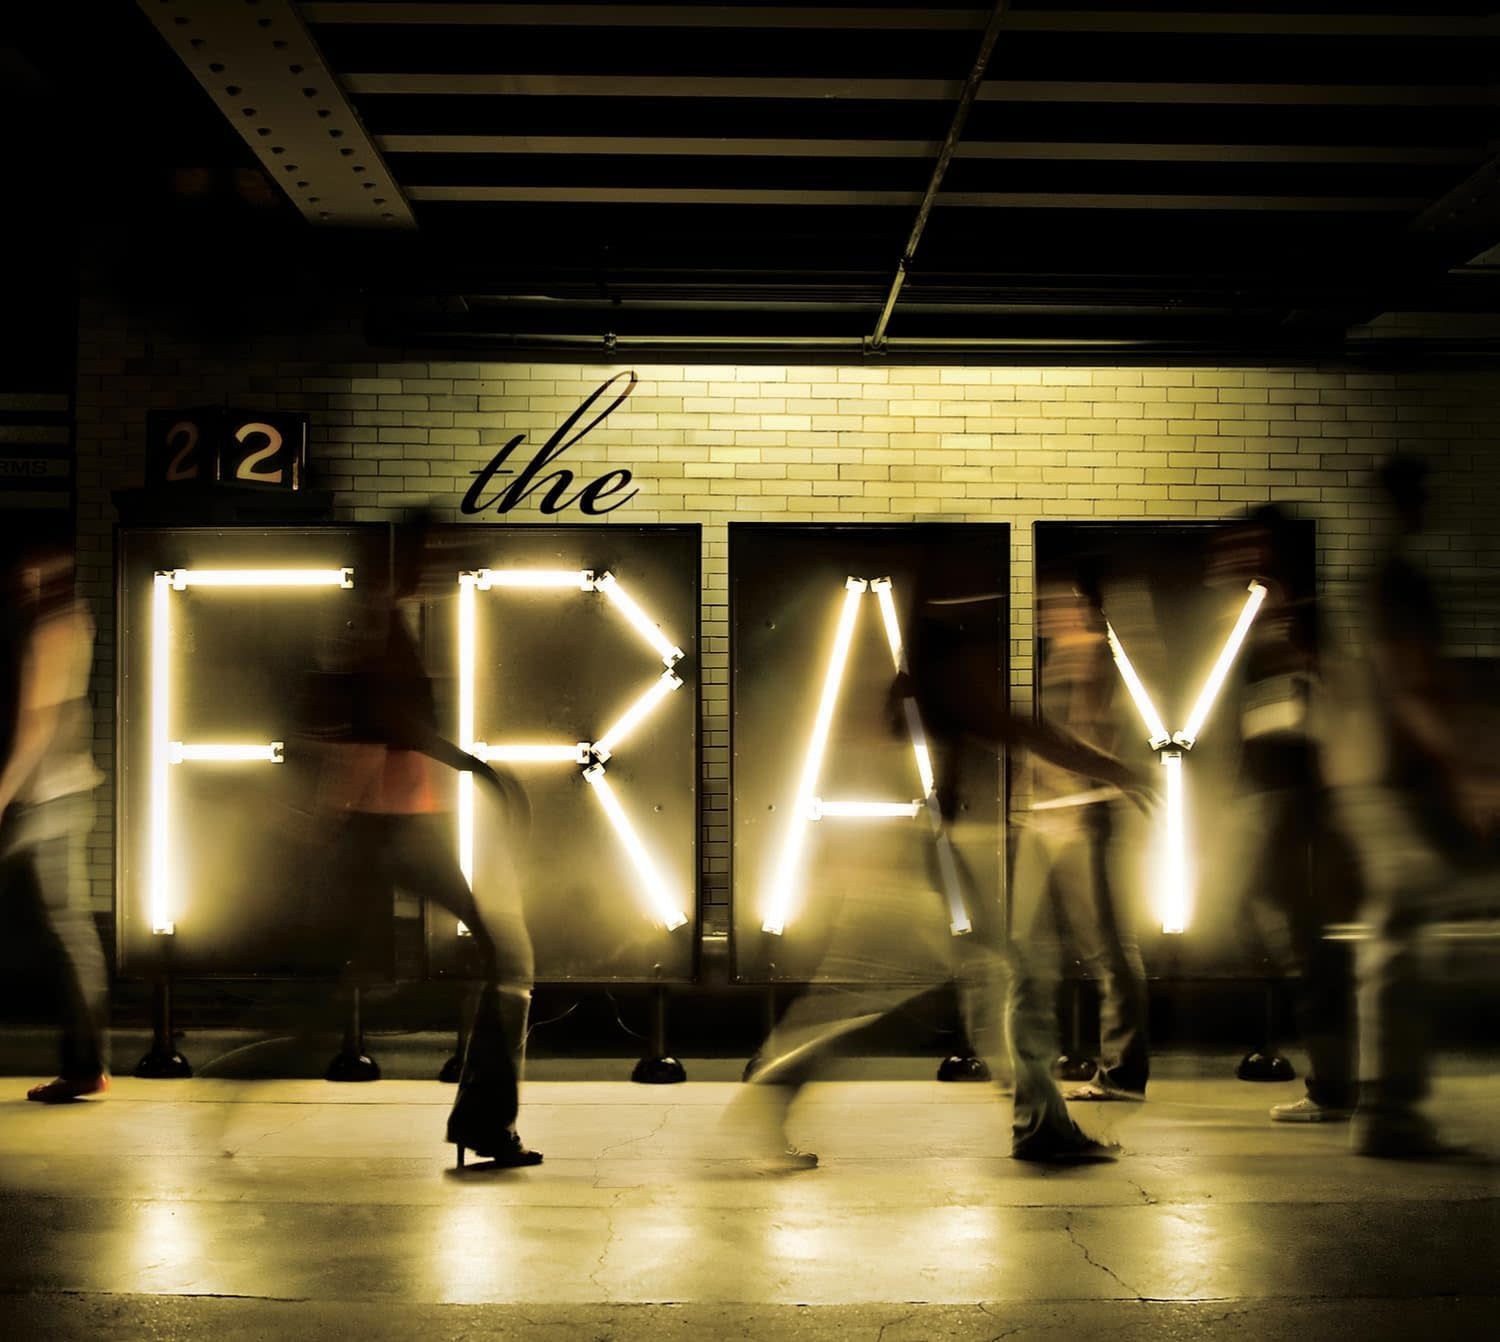 The Fray – The Fray